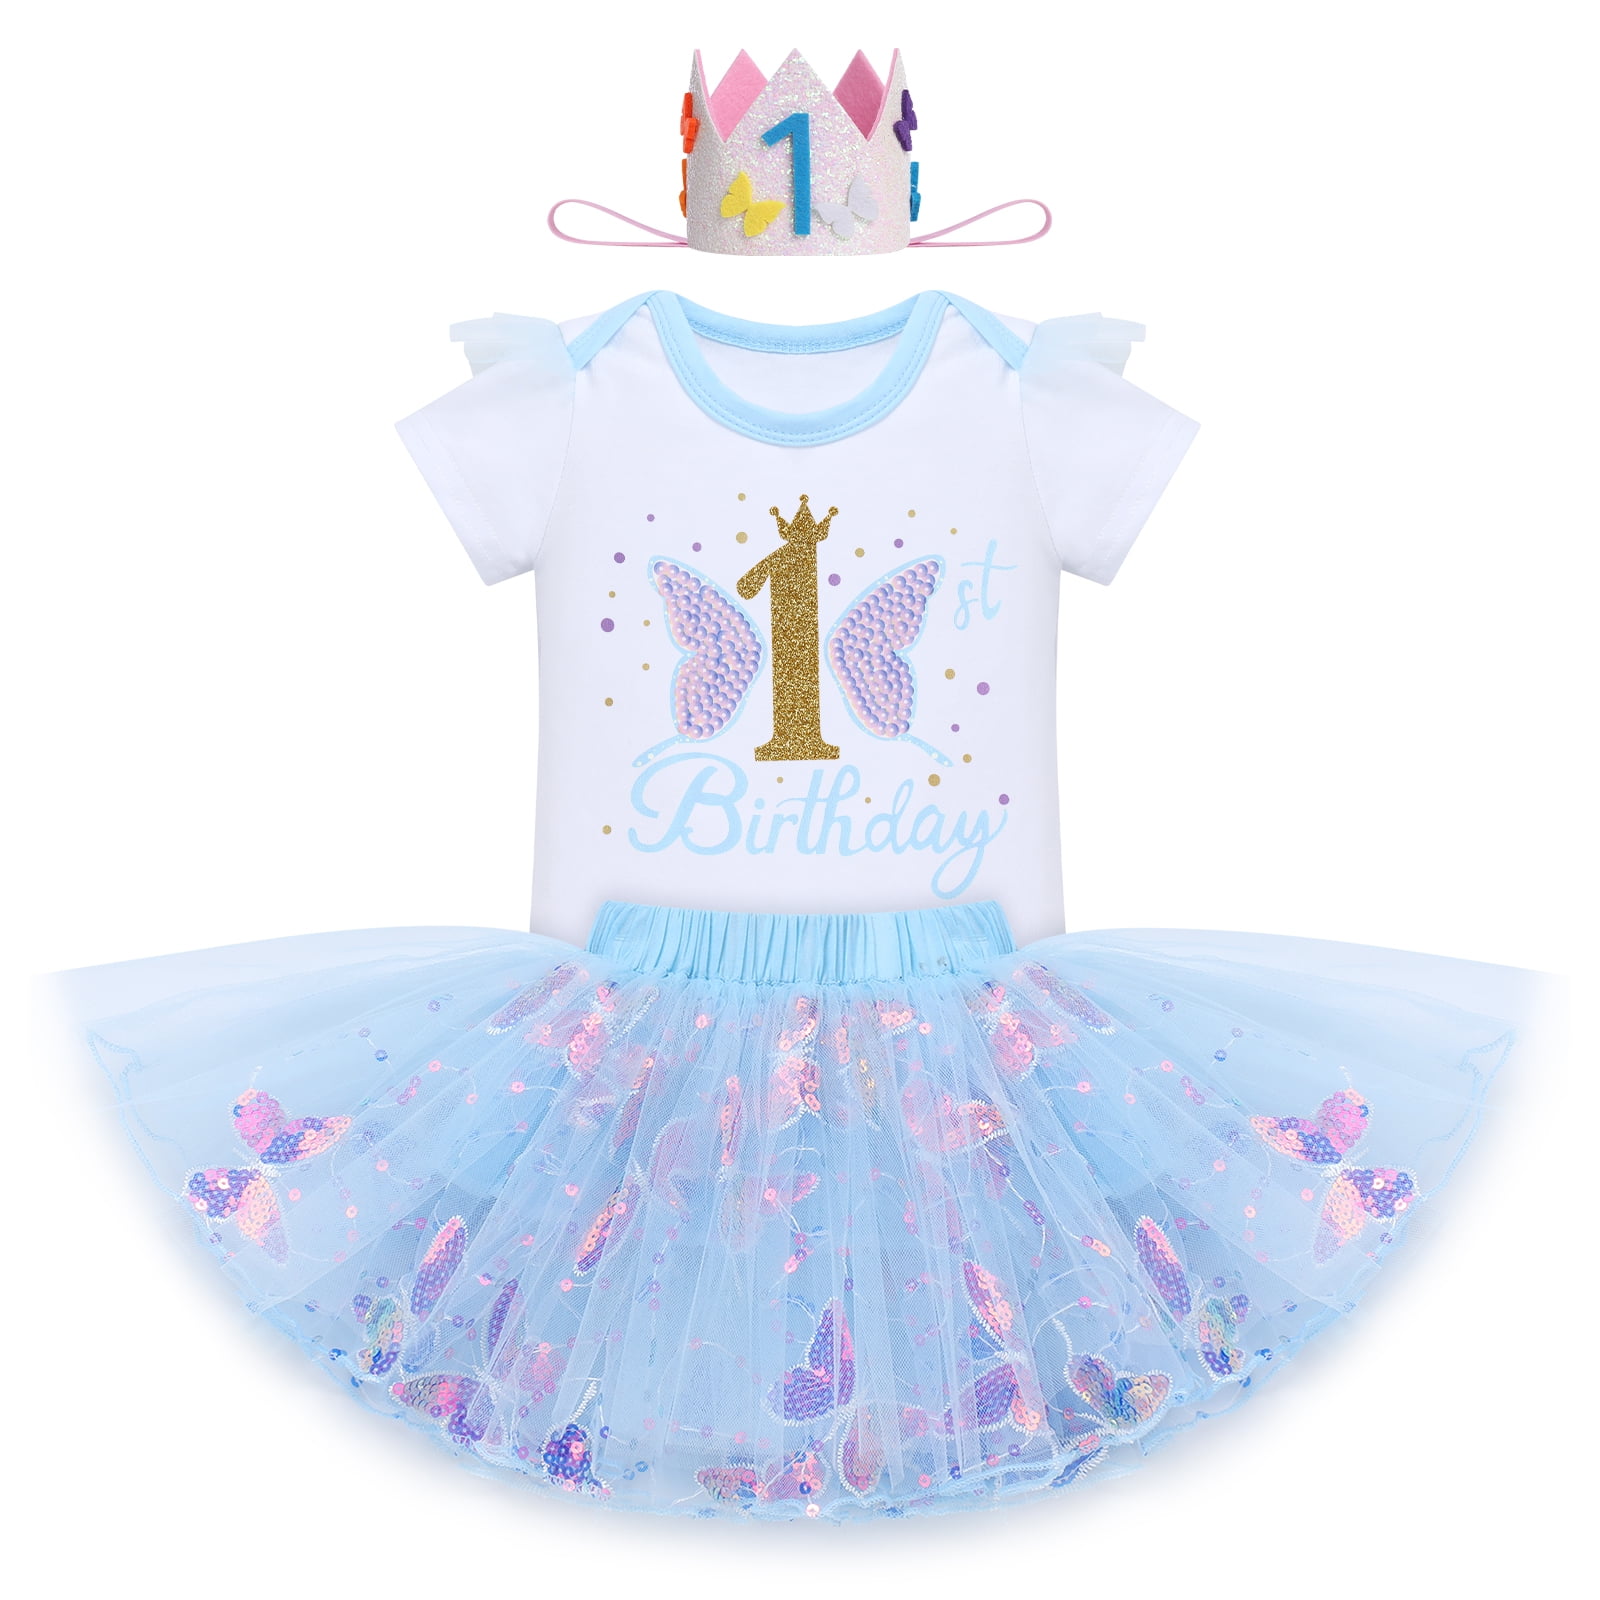 IBTOM CASTLE Baby Girl 1st Birthday Outfit Sequin Butterfly Romper Tutu  Skirt Headband Clothes for Cake Smash Photo Shoot 1 Year Blue Butterfly 